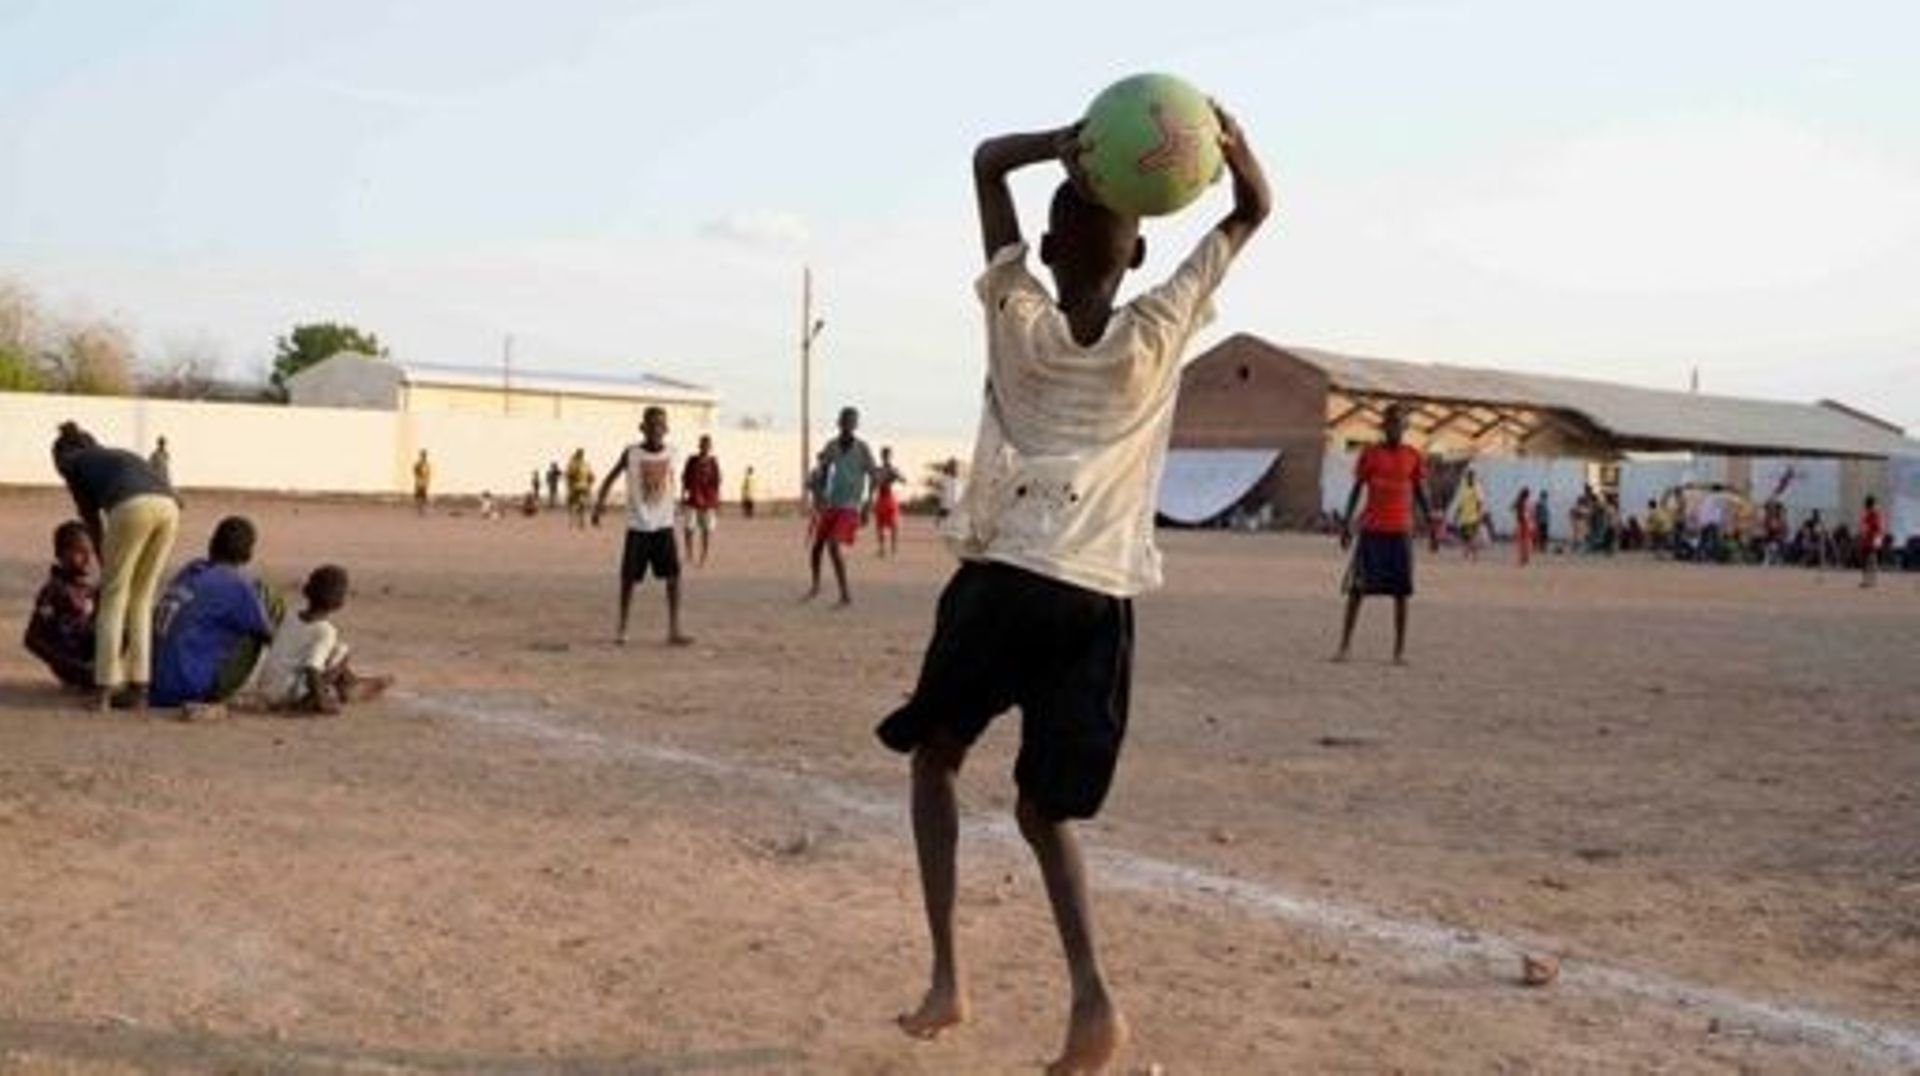 Internally displaced Sudanese youths play football while residing in the Hasahisa secondary school on July 10, 2023, transformed to house people fleeing violence in the war-torn country. Conflict-torn Sudan is on the brink of a "full-scale civil war" that